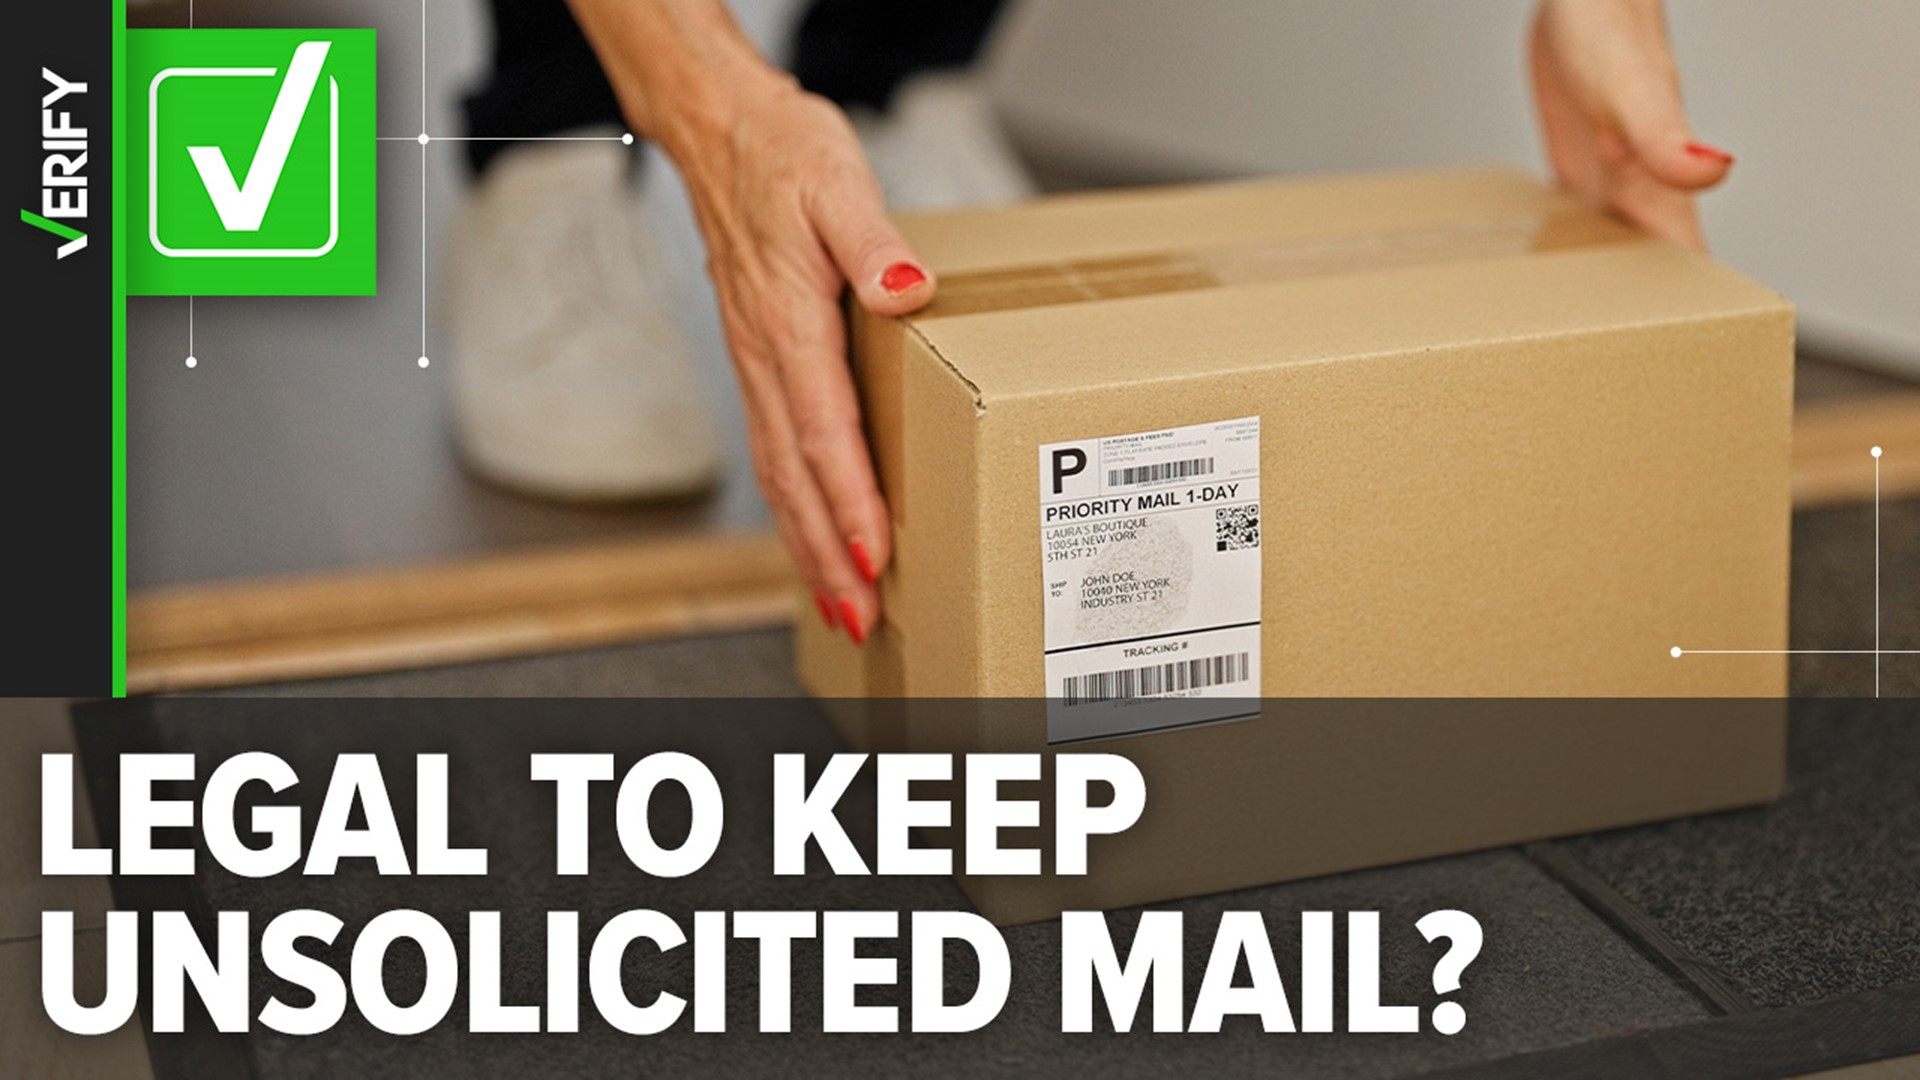 Federal law says if you receive an unordered package with your name and address on it, then it’s considered a free gift.